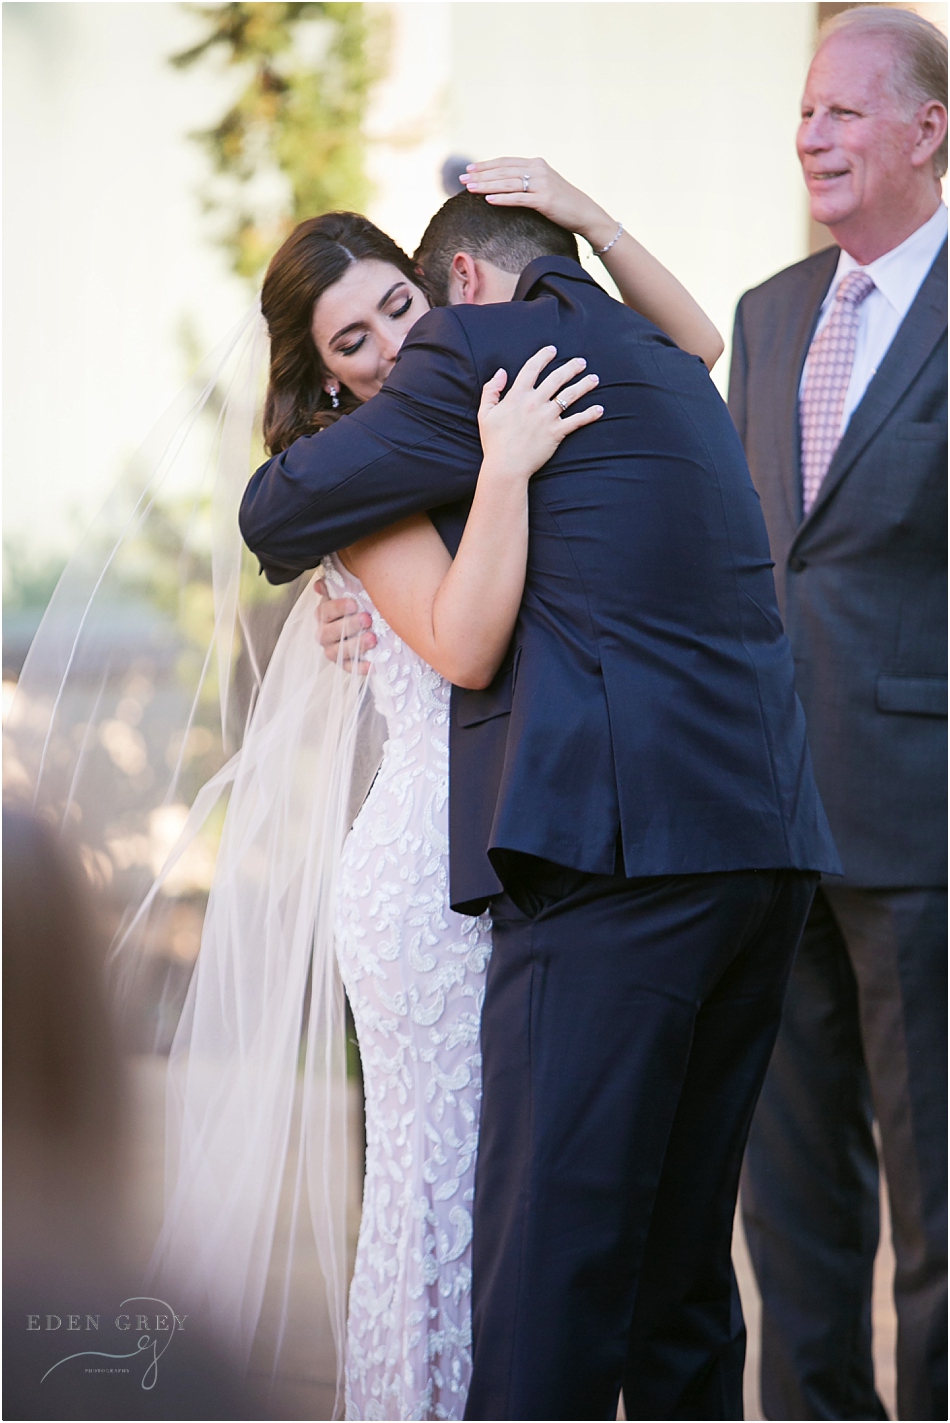 Intimate moments during the wedding